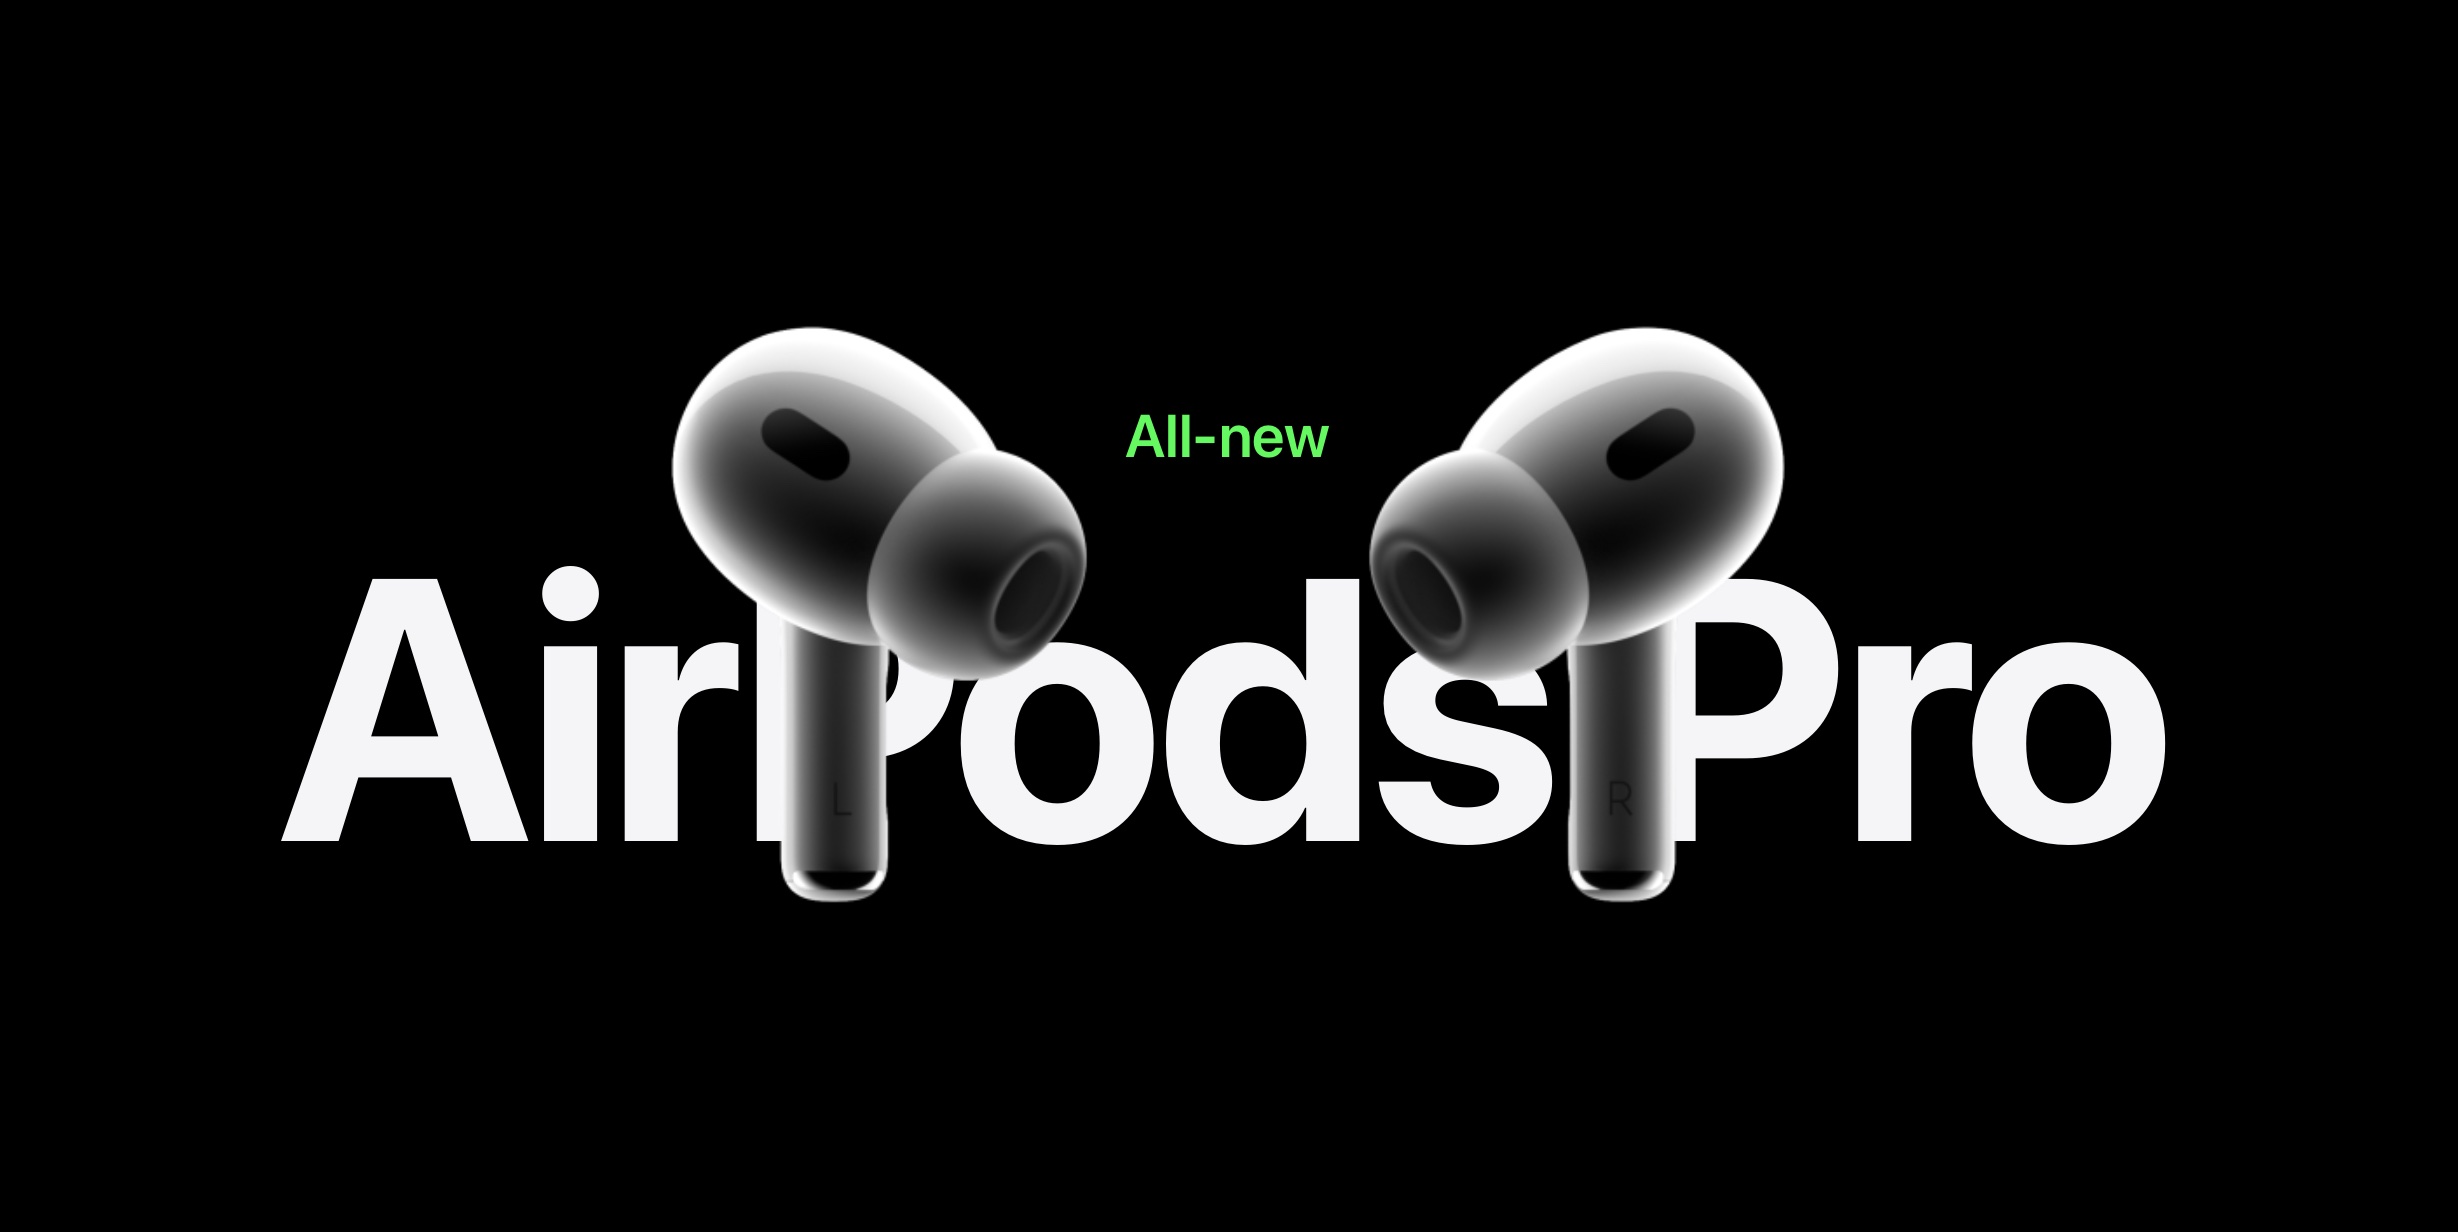 AirPods Pro 2 could feature lossless support in the future